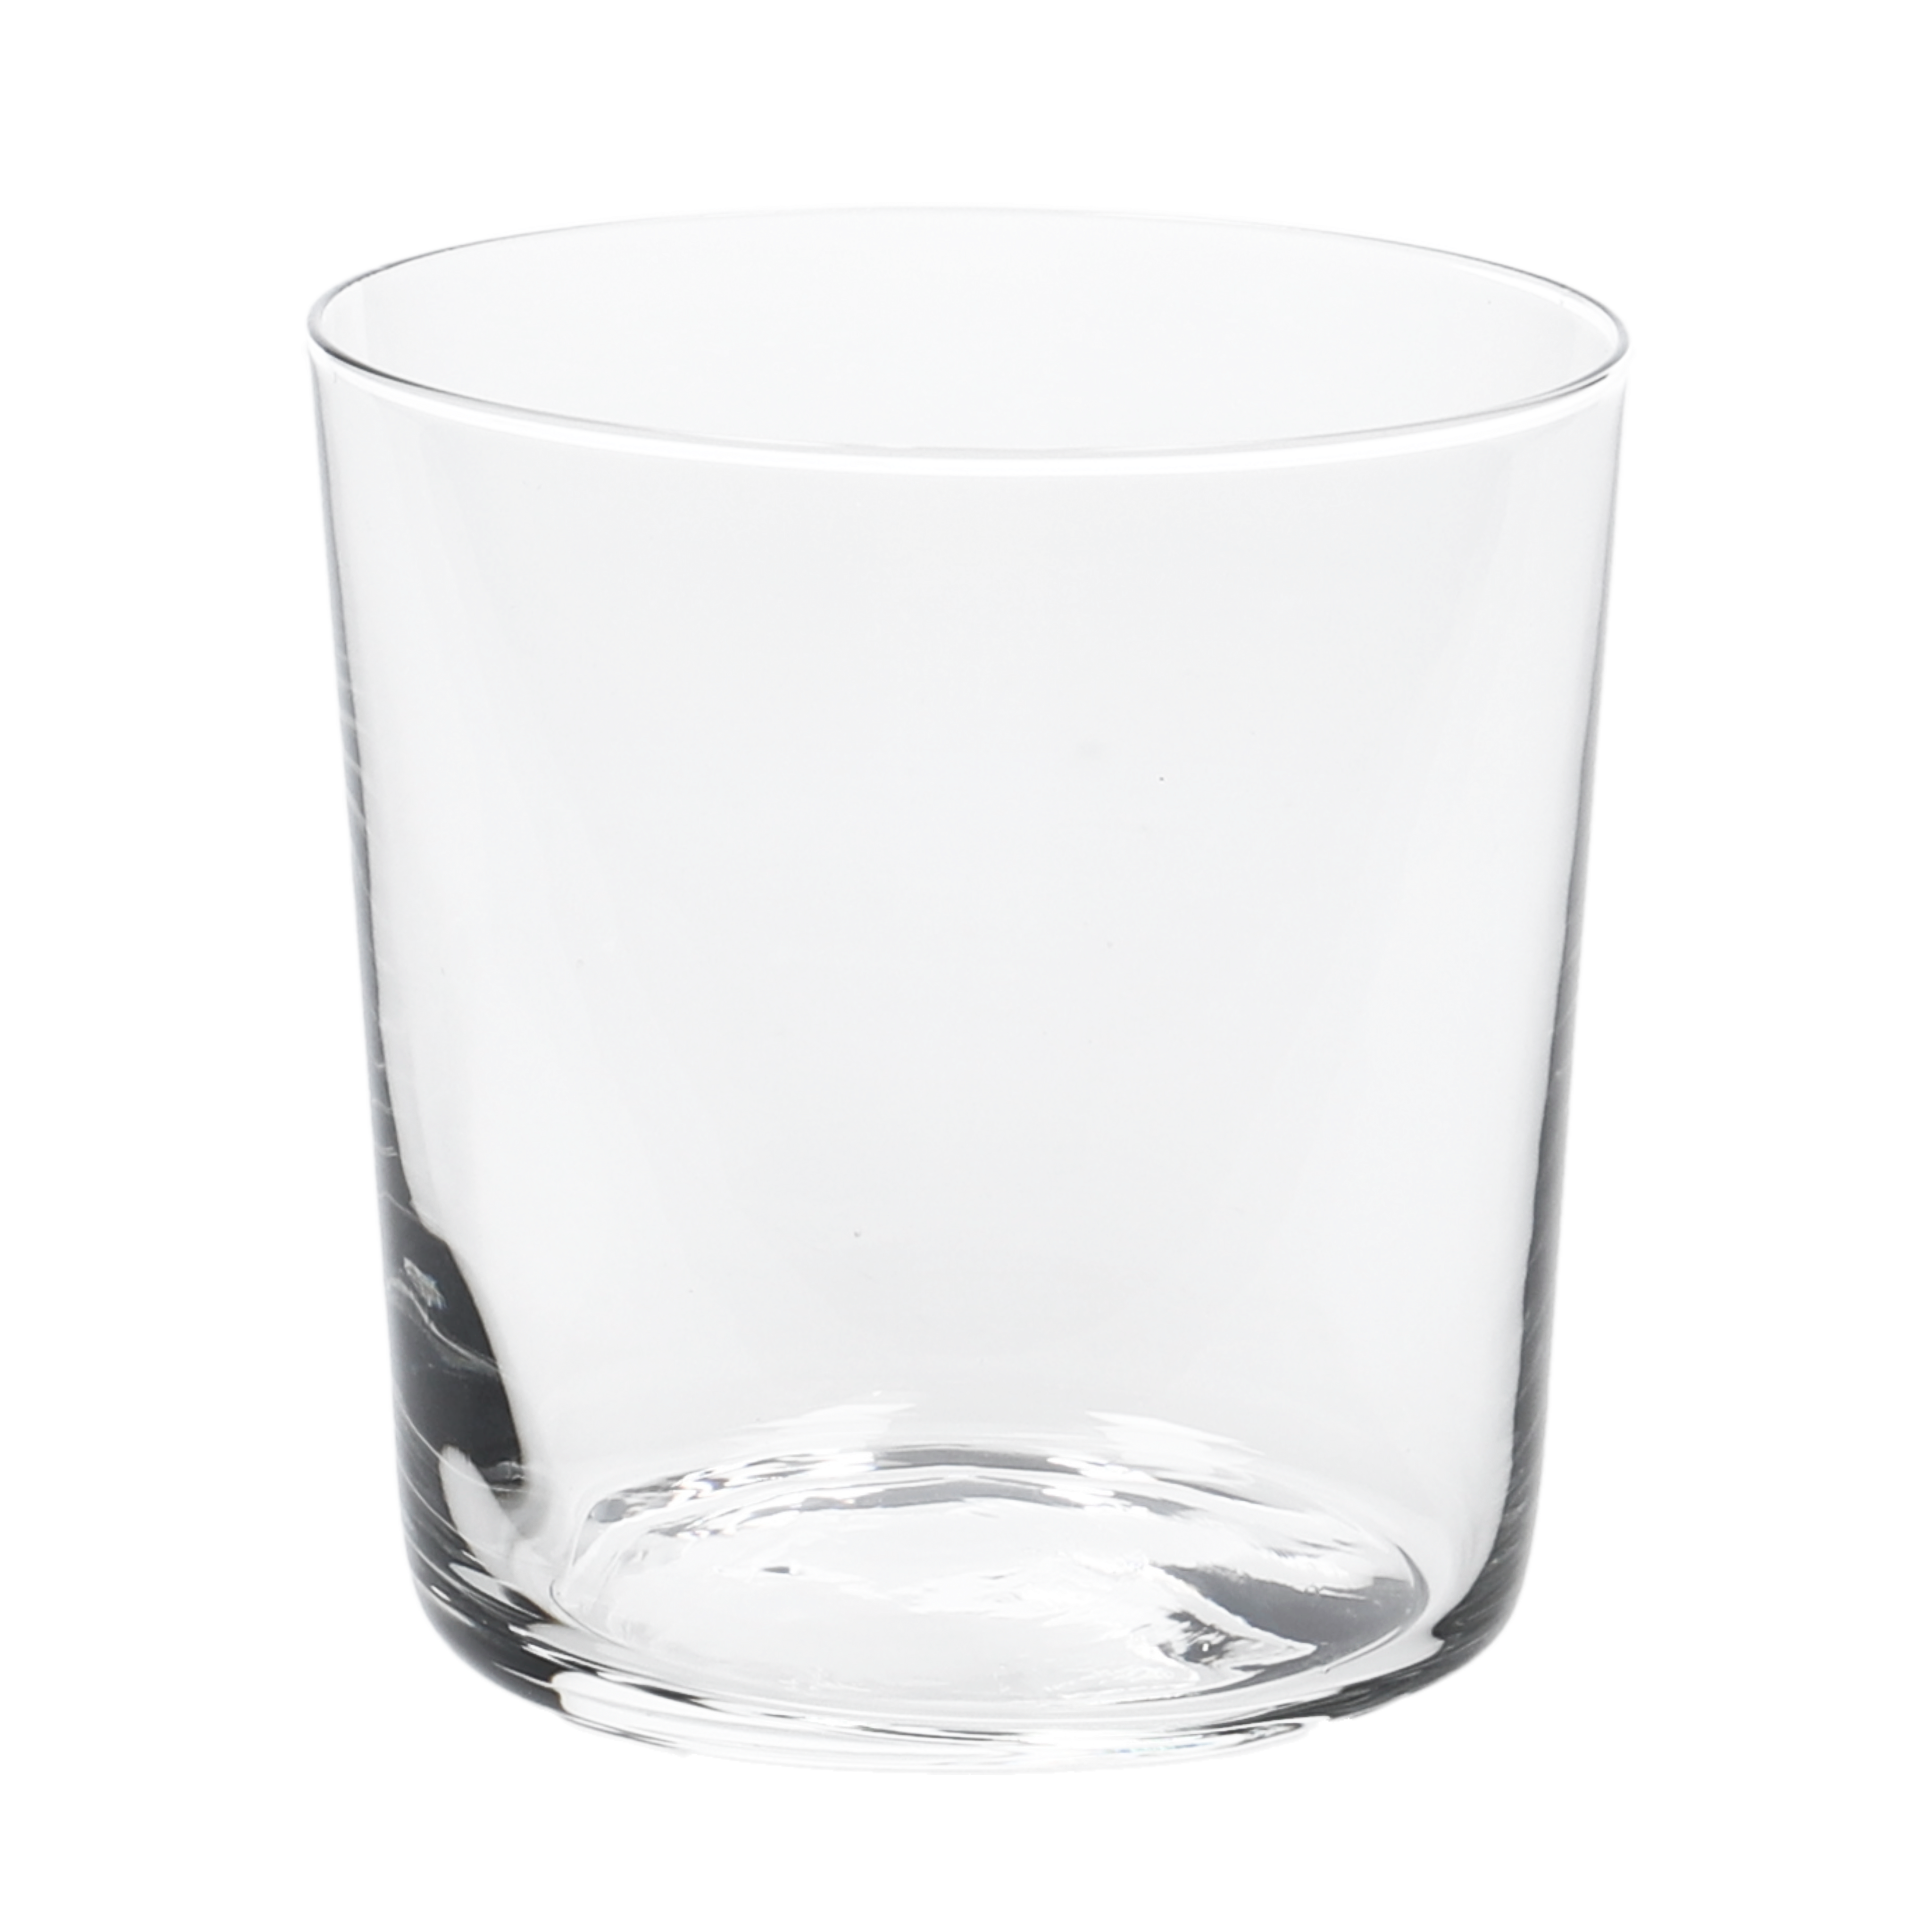 https://www.nordicnest.com/assets/blobs/scandi-living-day-to-day-drinking-glass-37-cl-clear/576994-01_1_ProductImageMain-49e863305e.png